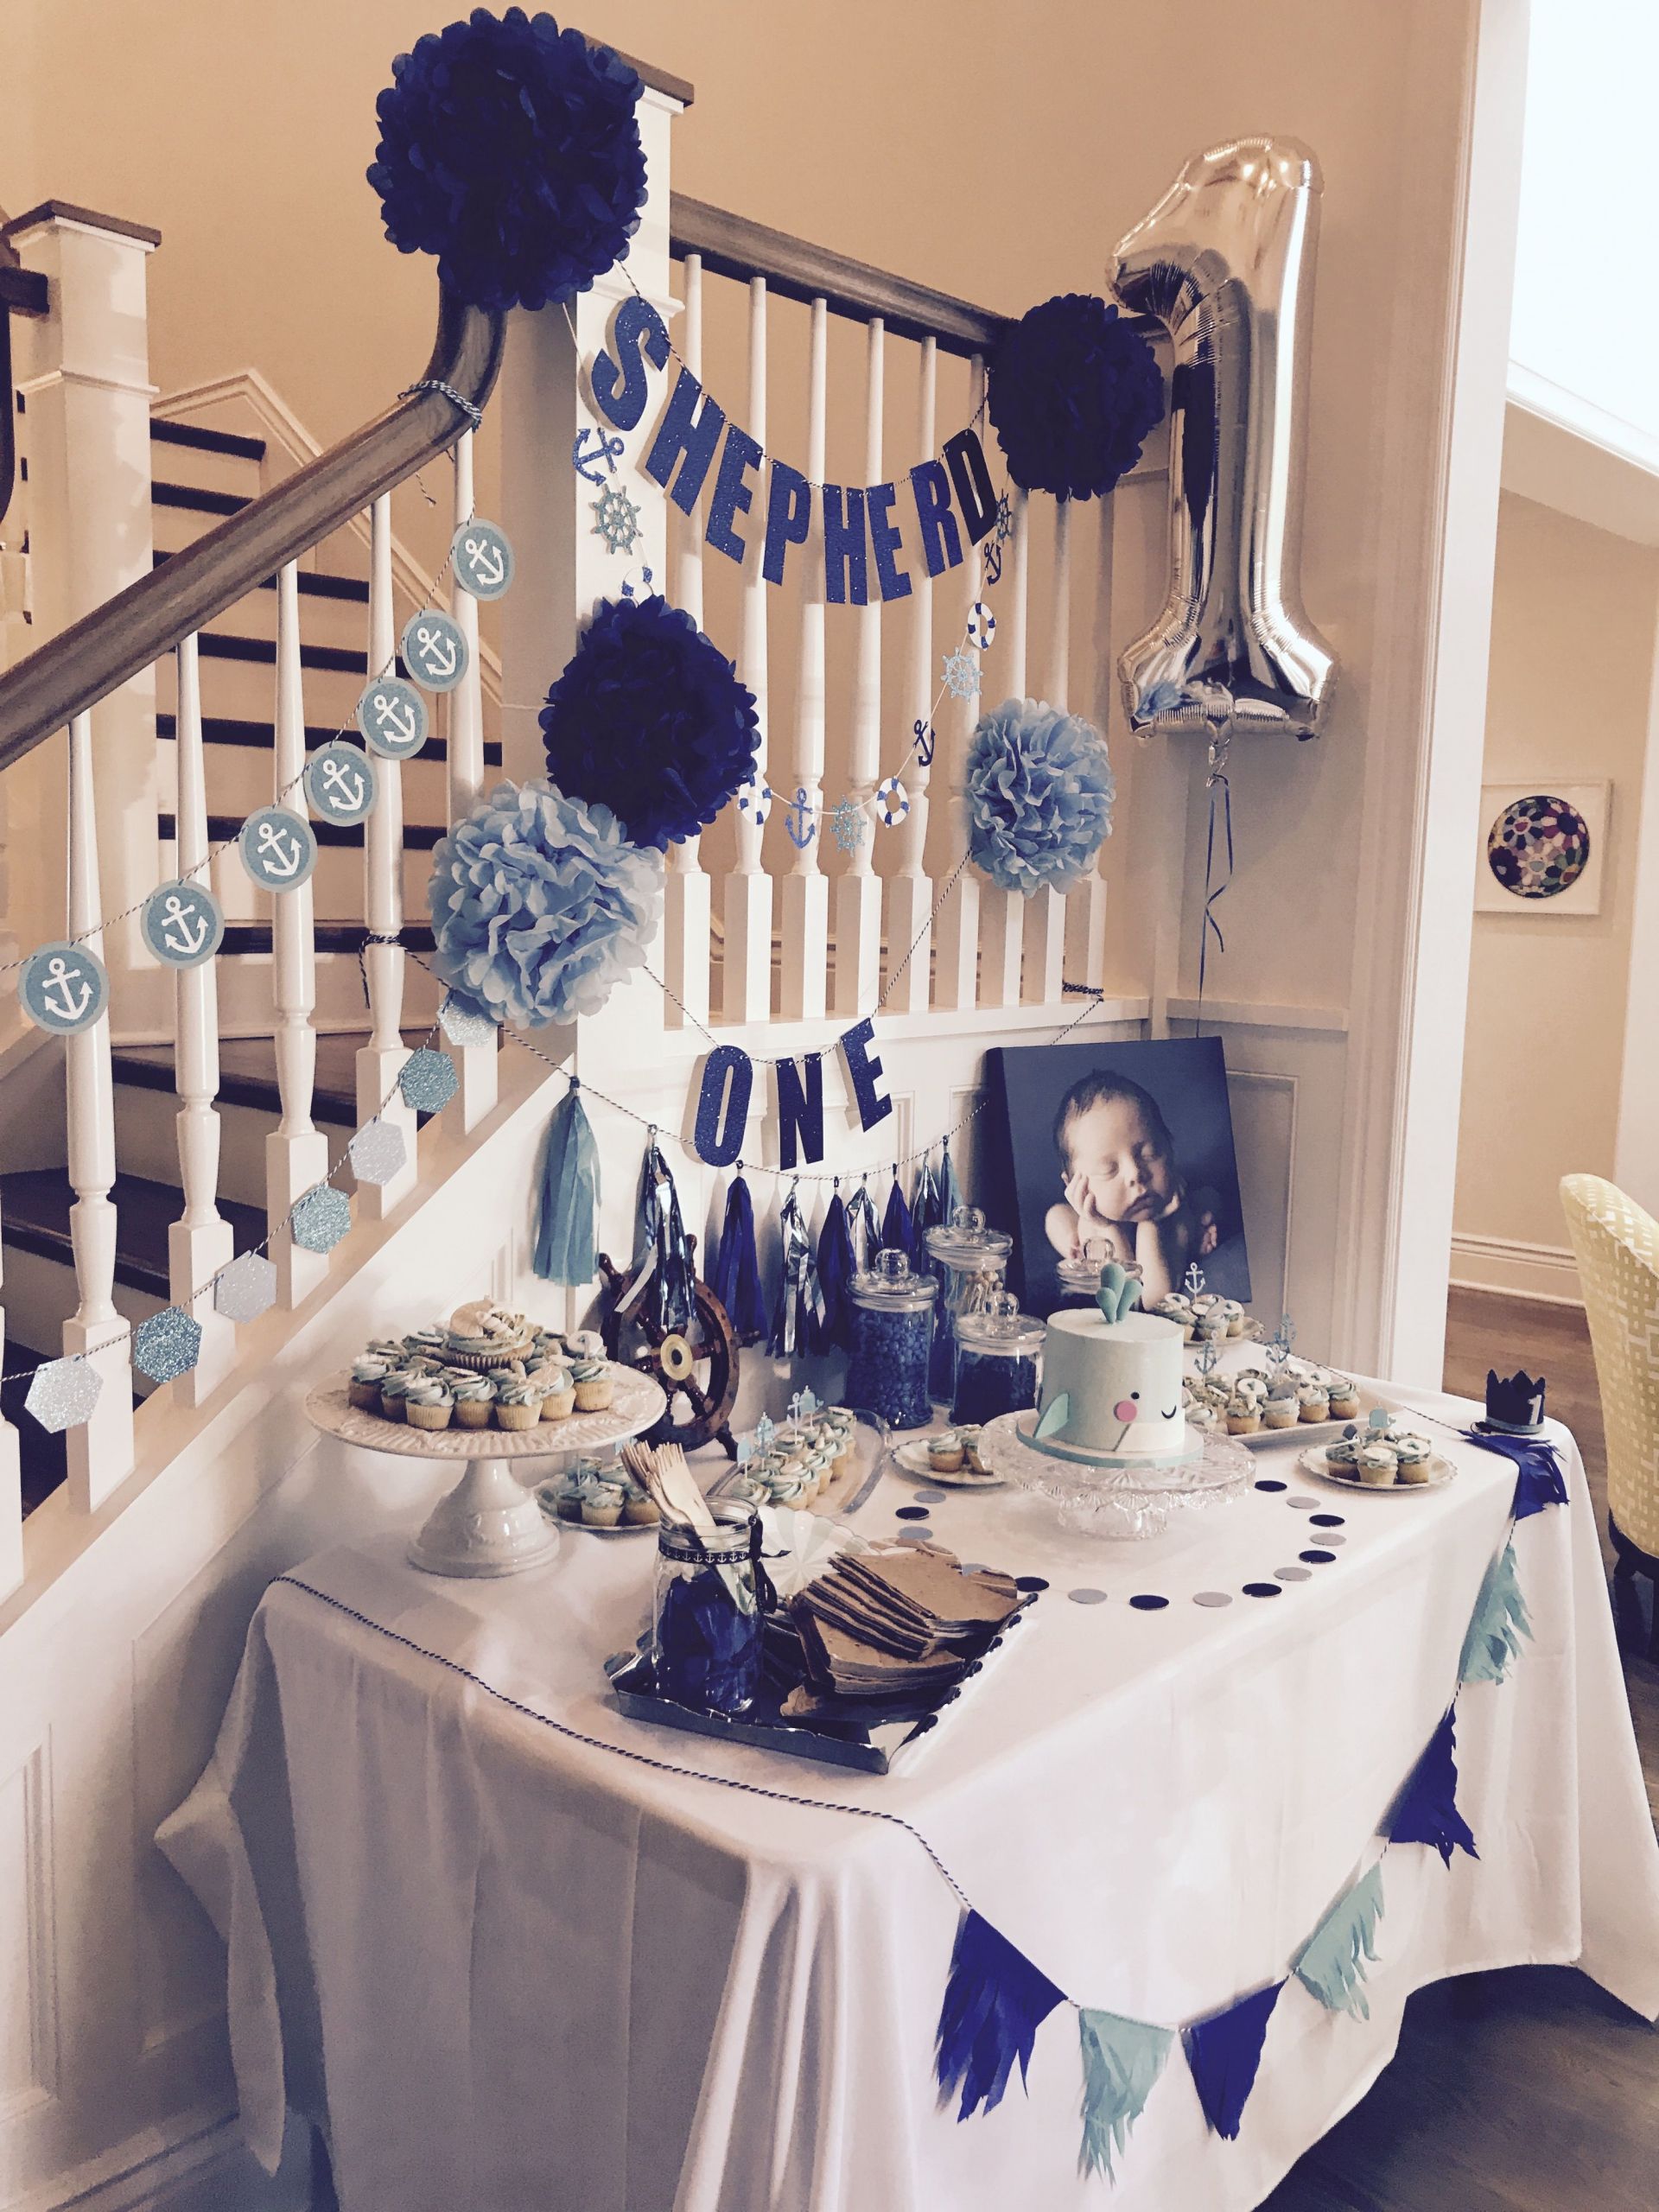 Baby Boy 1st Birthday Decorations
 Dessert table for baby s first birthday